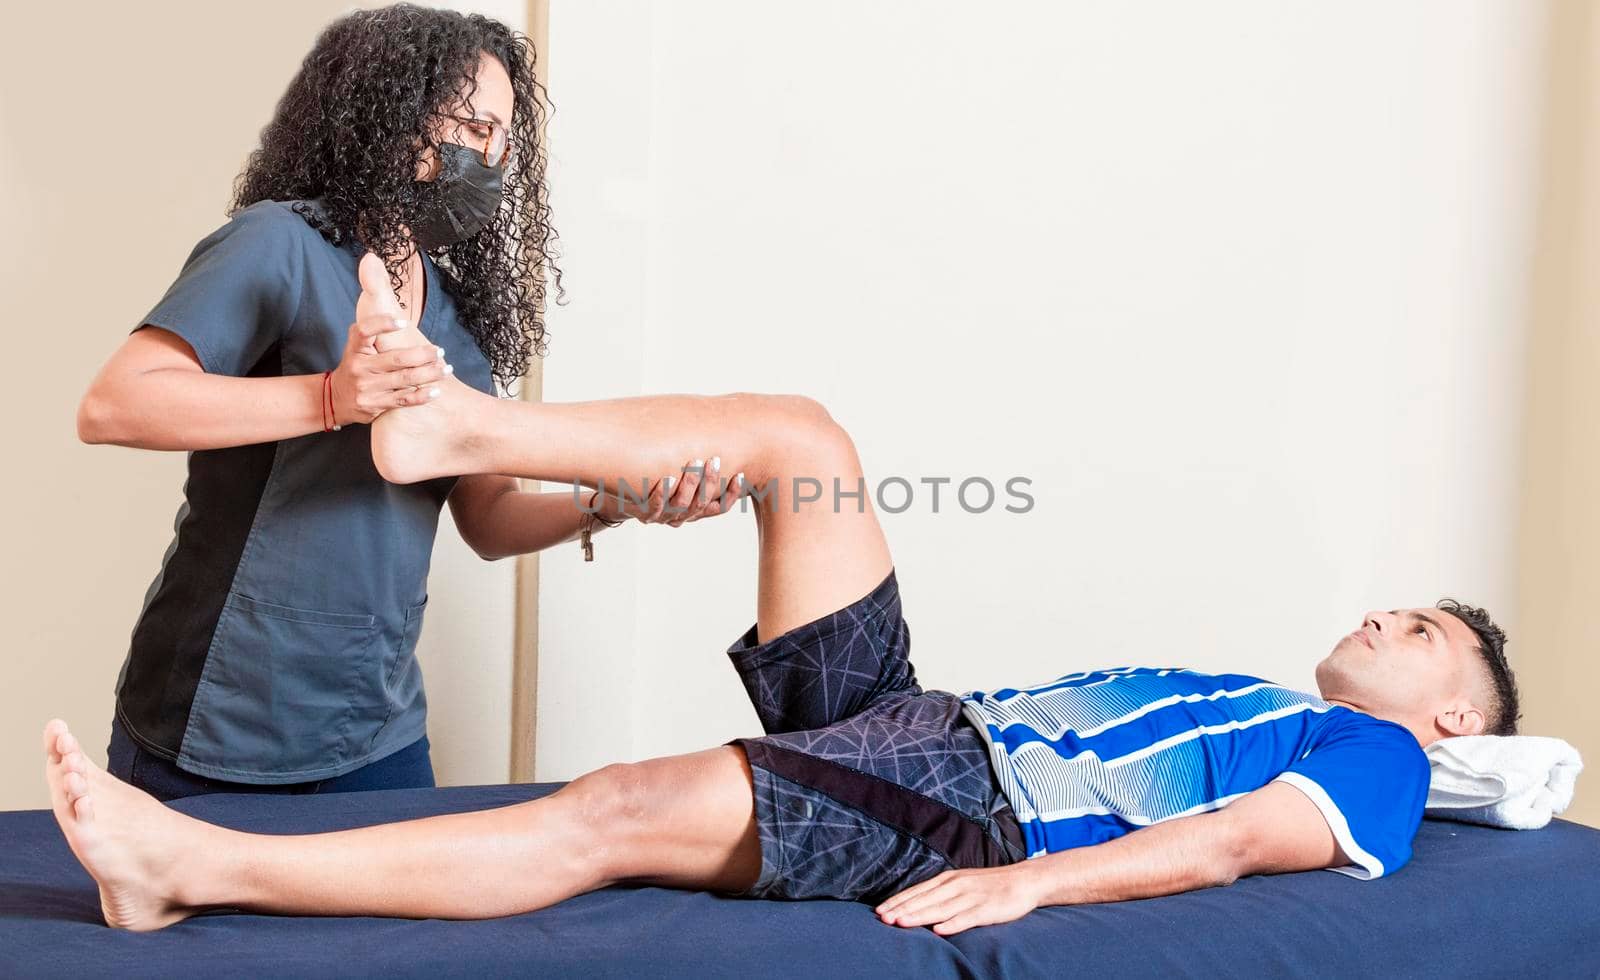 Knee rehabilitation physiotherapy, female doctor with patient undergoing knee treatment by isaiphoto